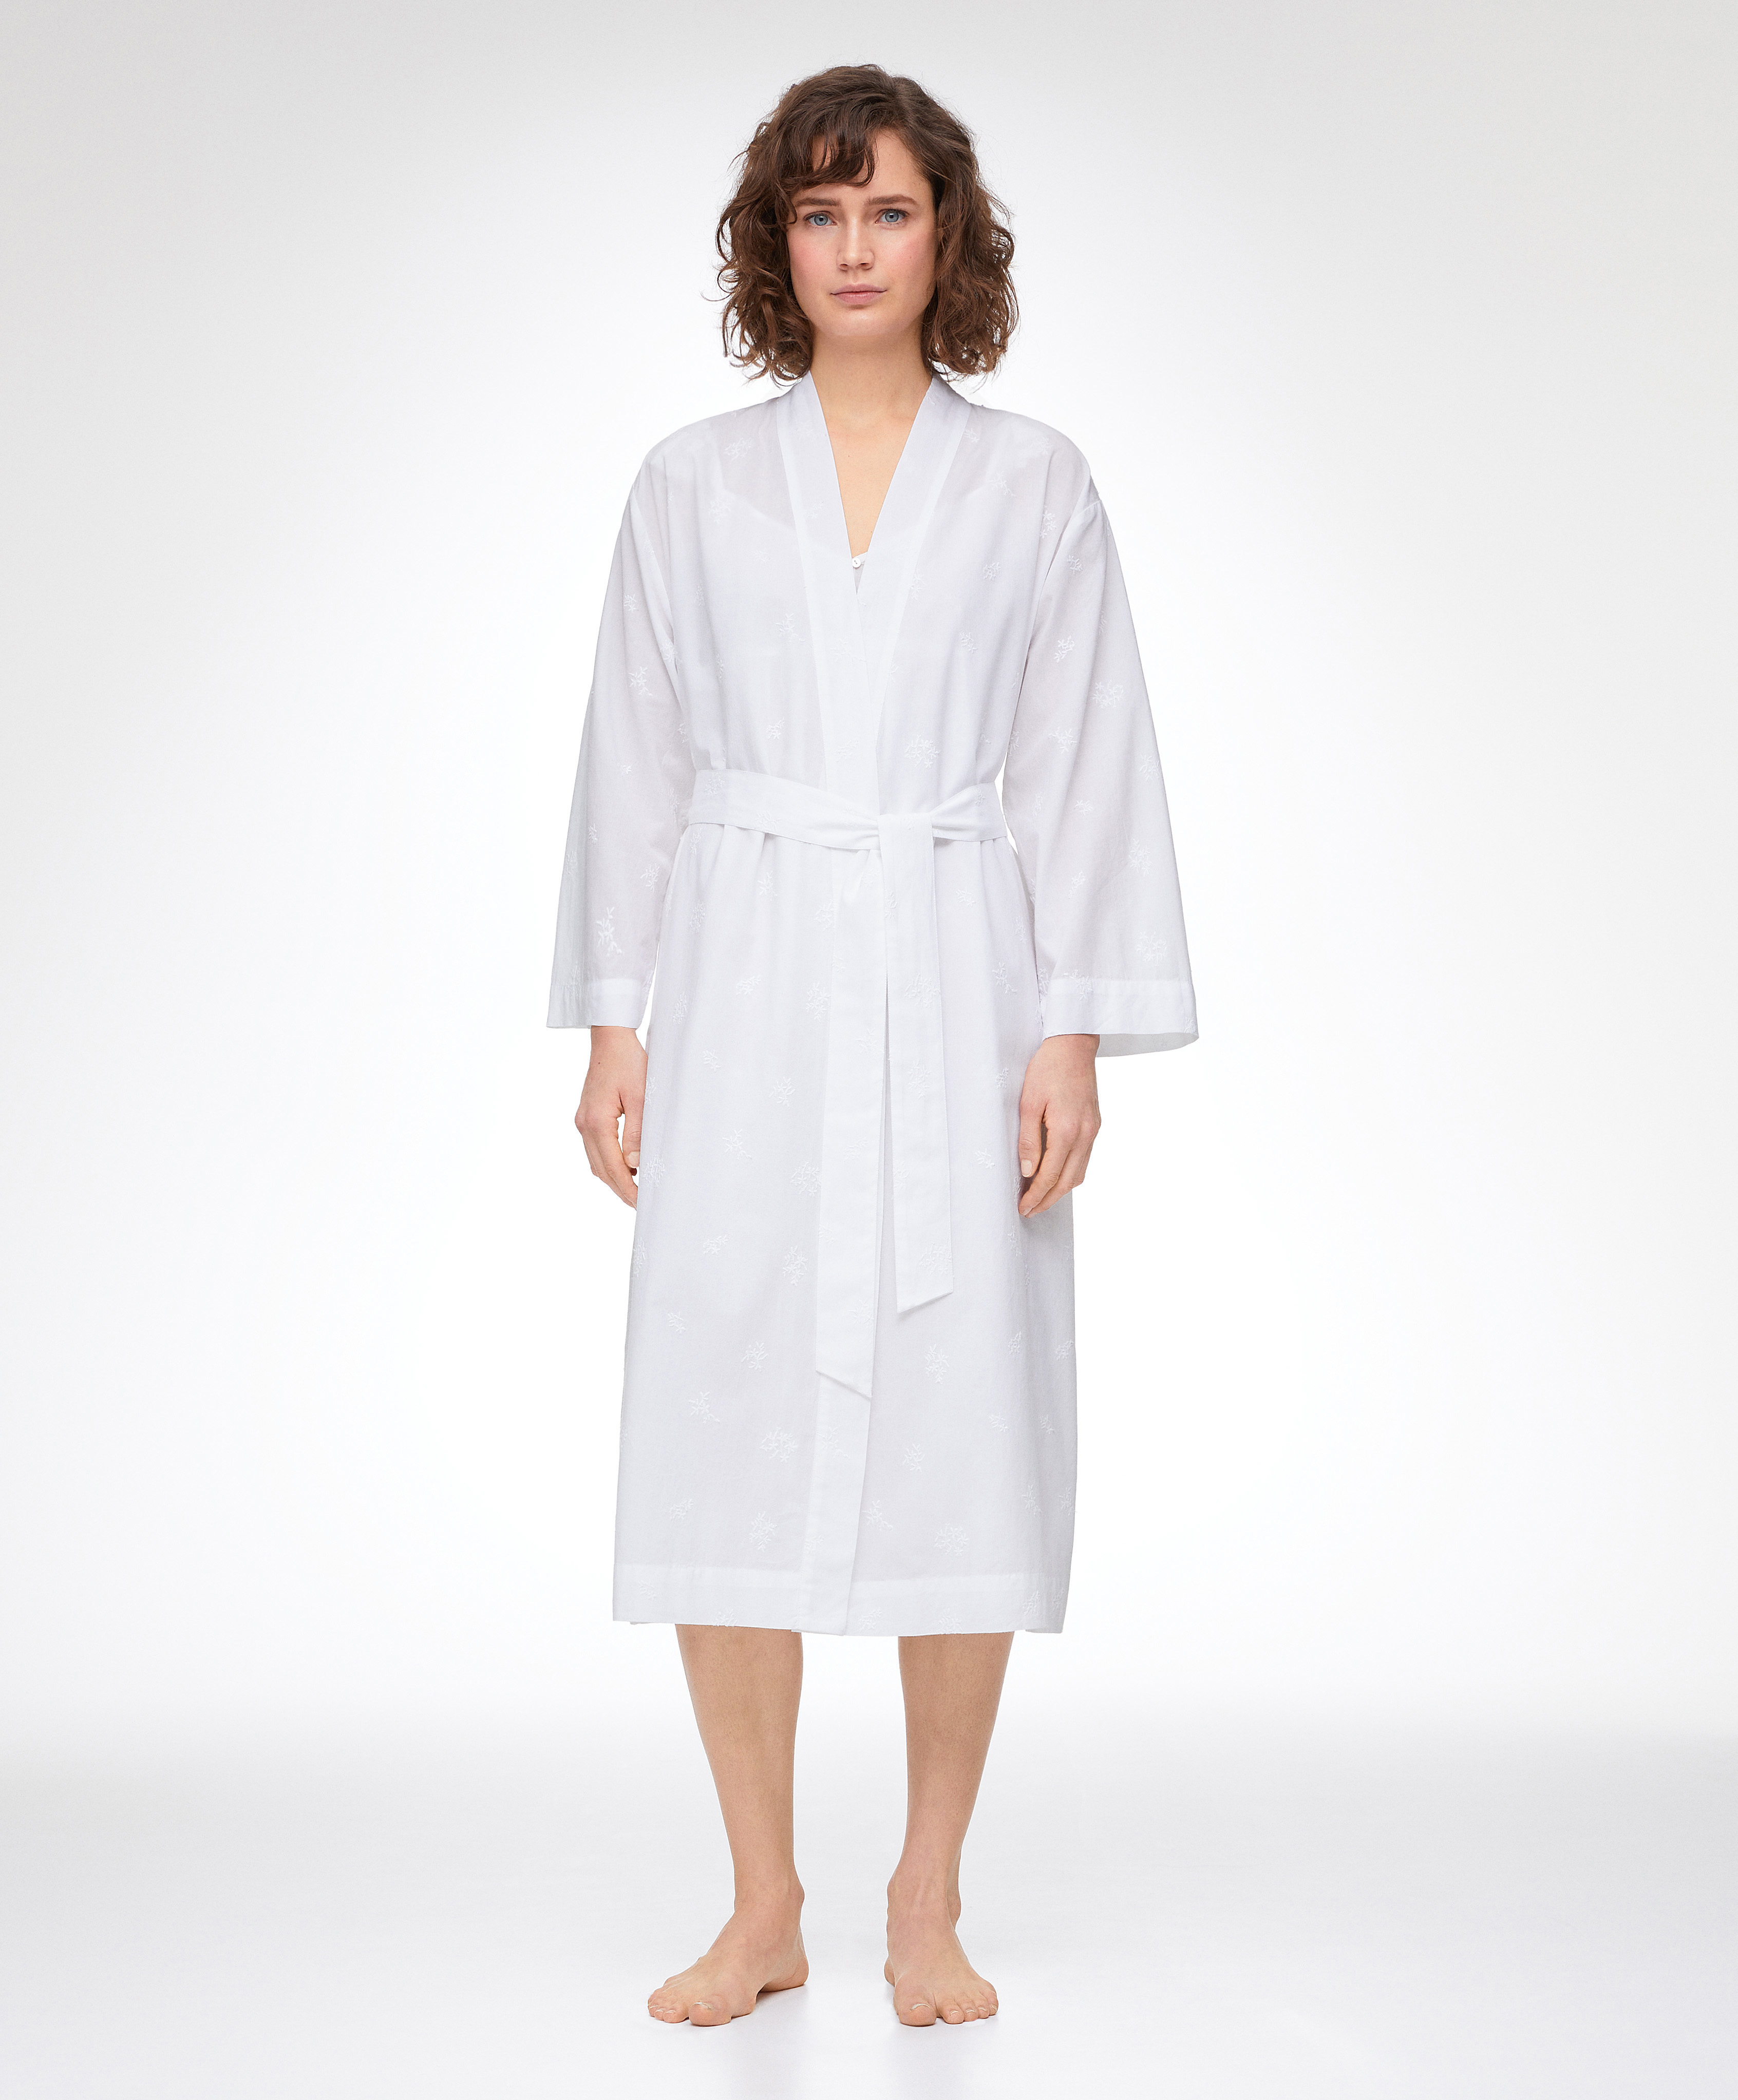 Embroidered 100% cotton dressing gown